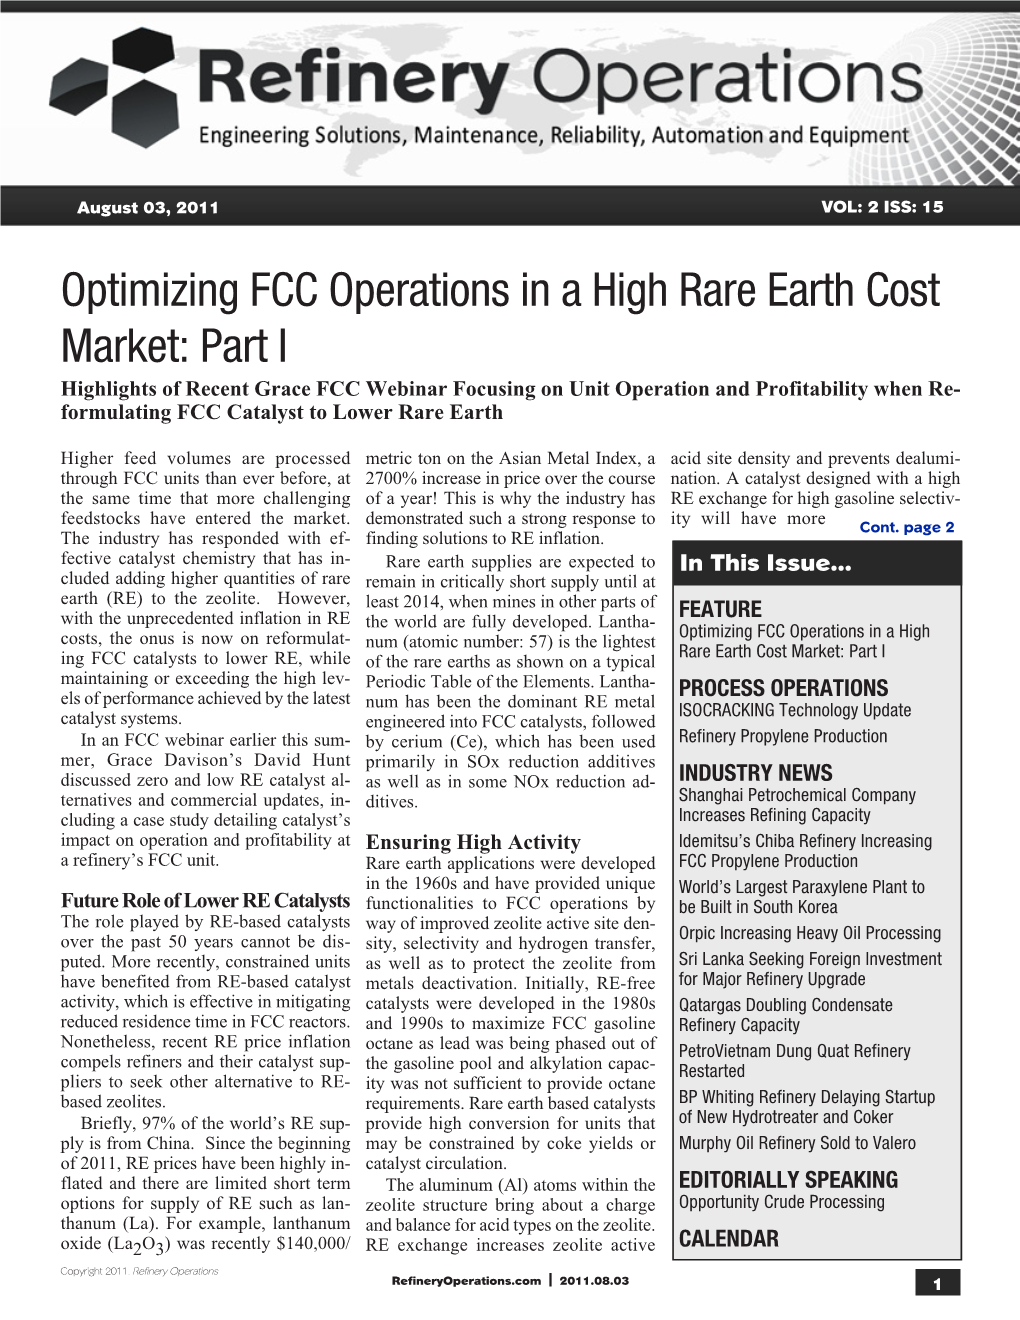 Optimizing FCC Operations in a High Rare Earth